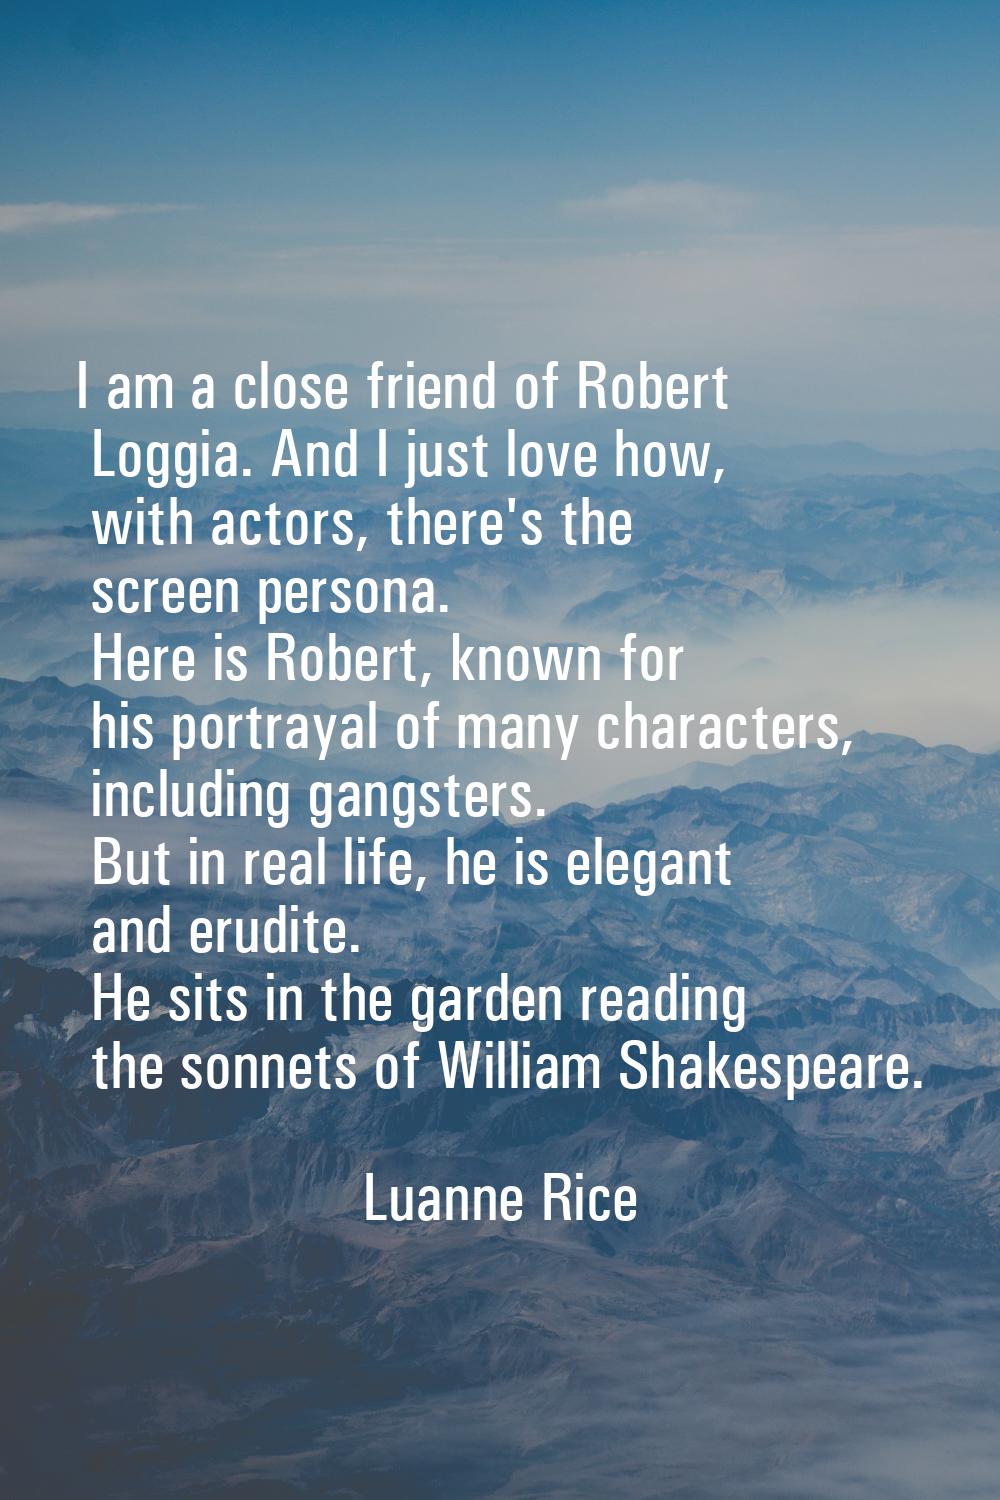 I am a close friend of Robert Loggia. And I just love how, with actors, there's the screen persona.